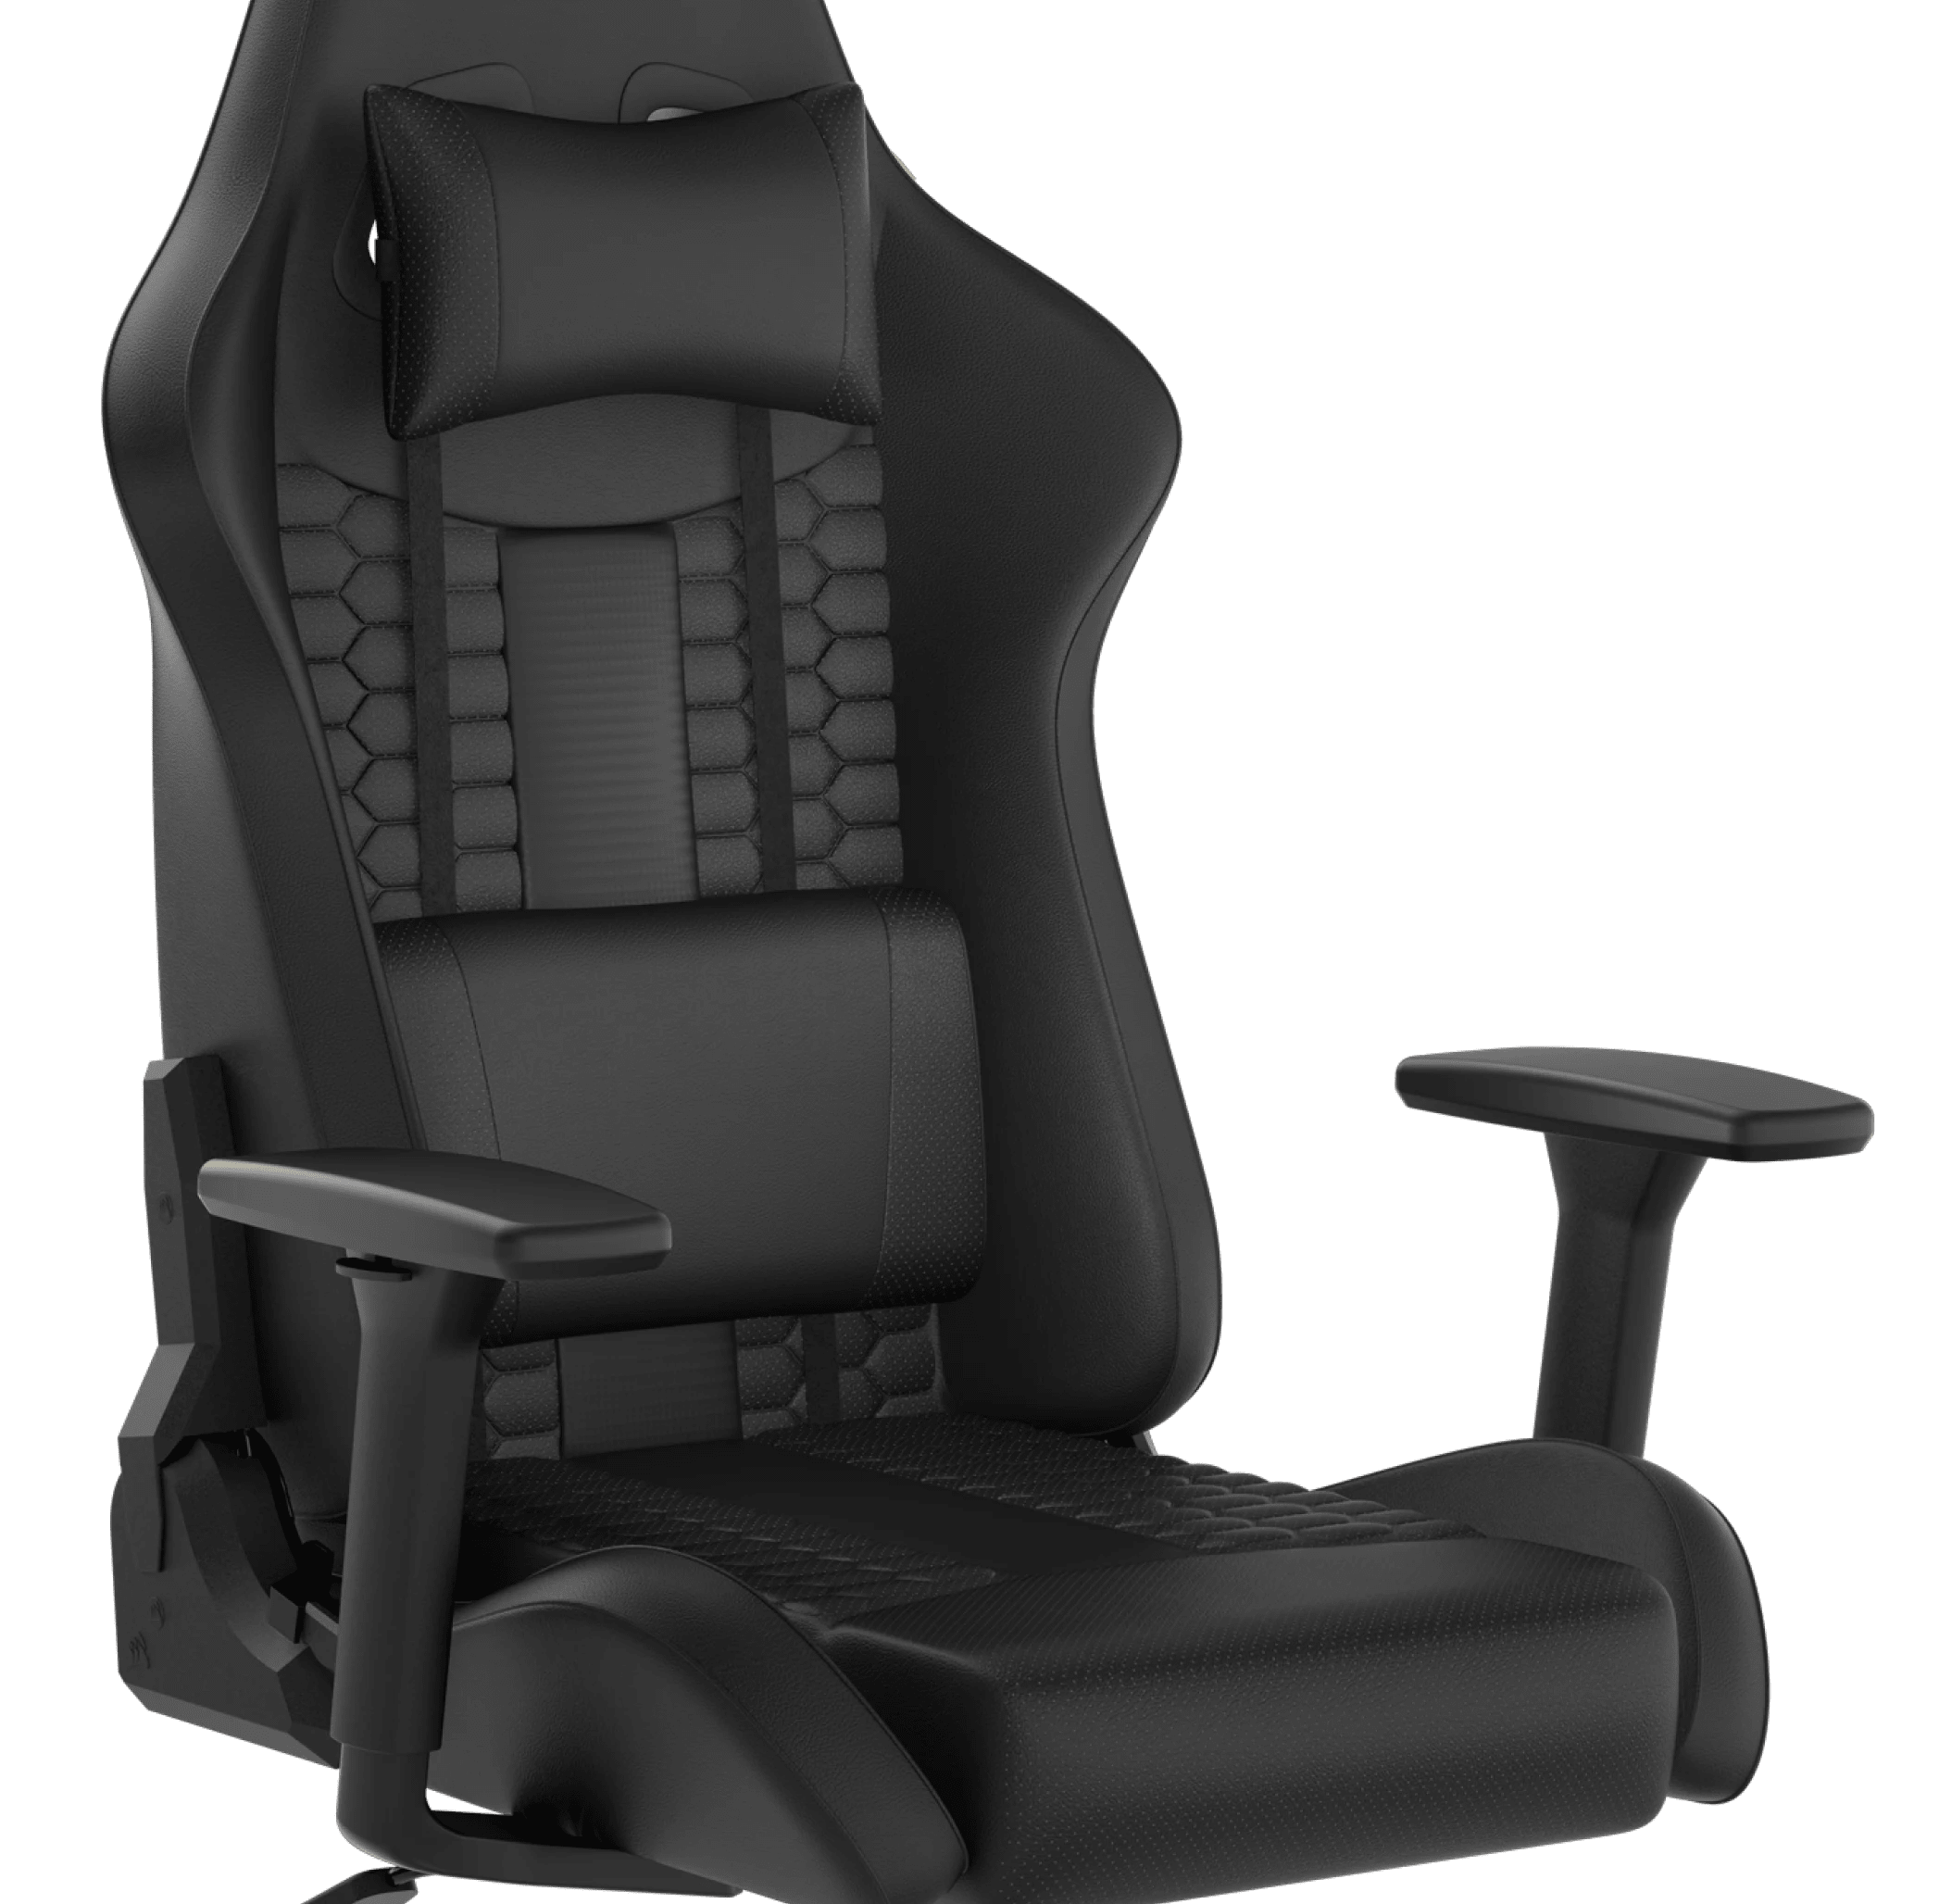 TC100 RELAXED Gaming - Black/Black Leatherette Chair